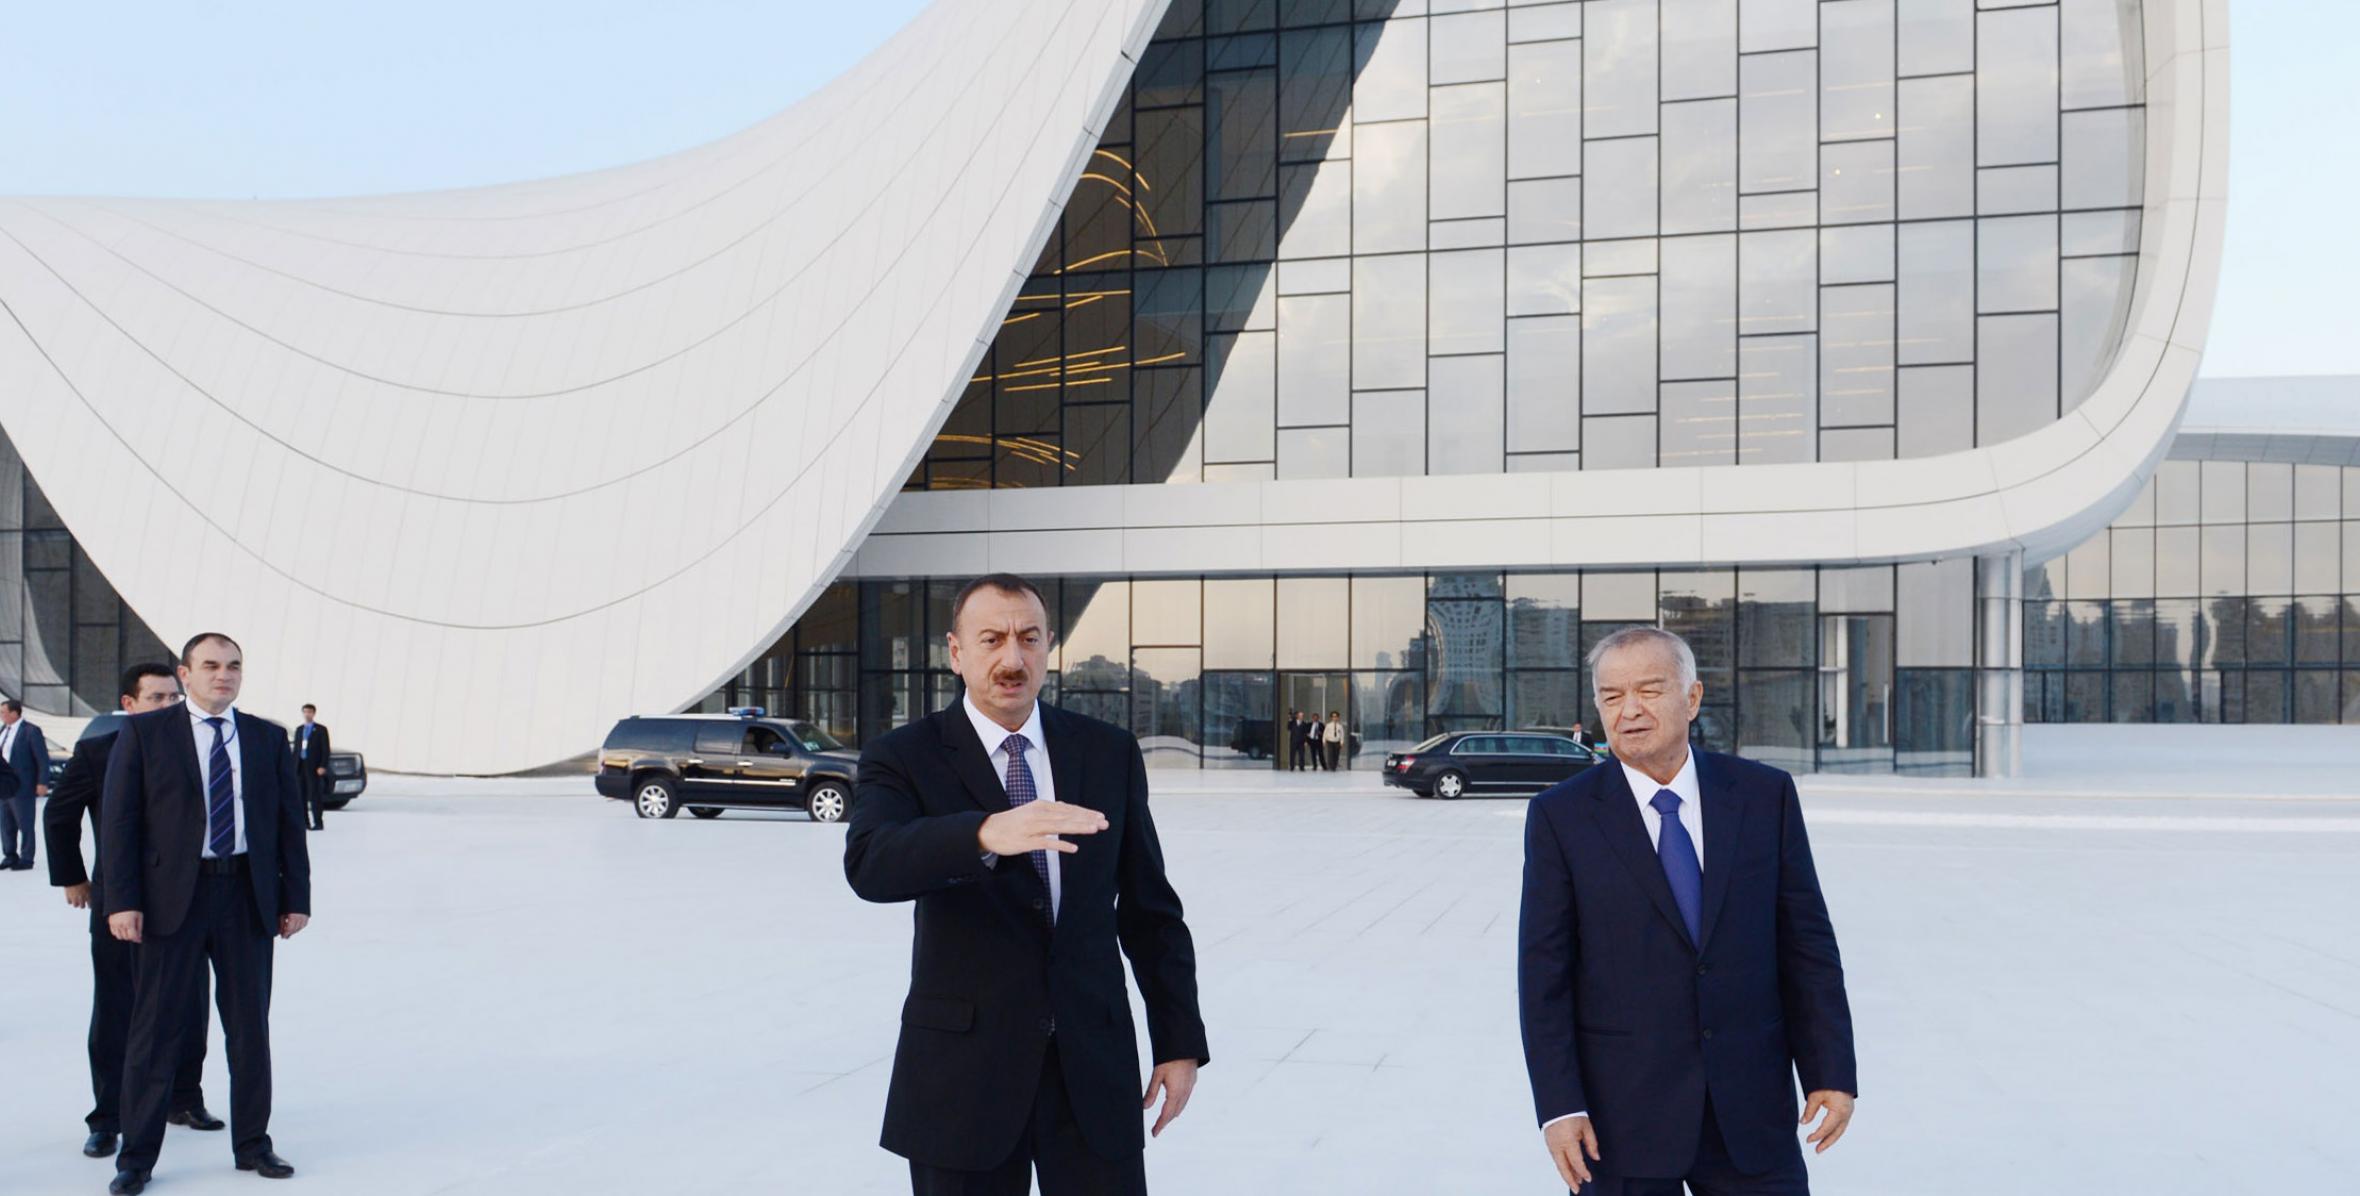 Presidents of Azerbaijan and Uzbekistan visited the State Flag Square and the Heydar Aliyev Center